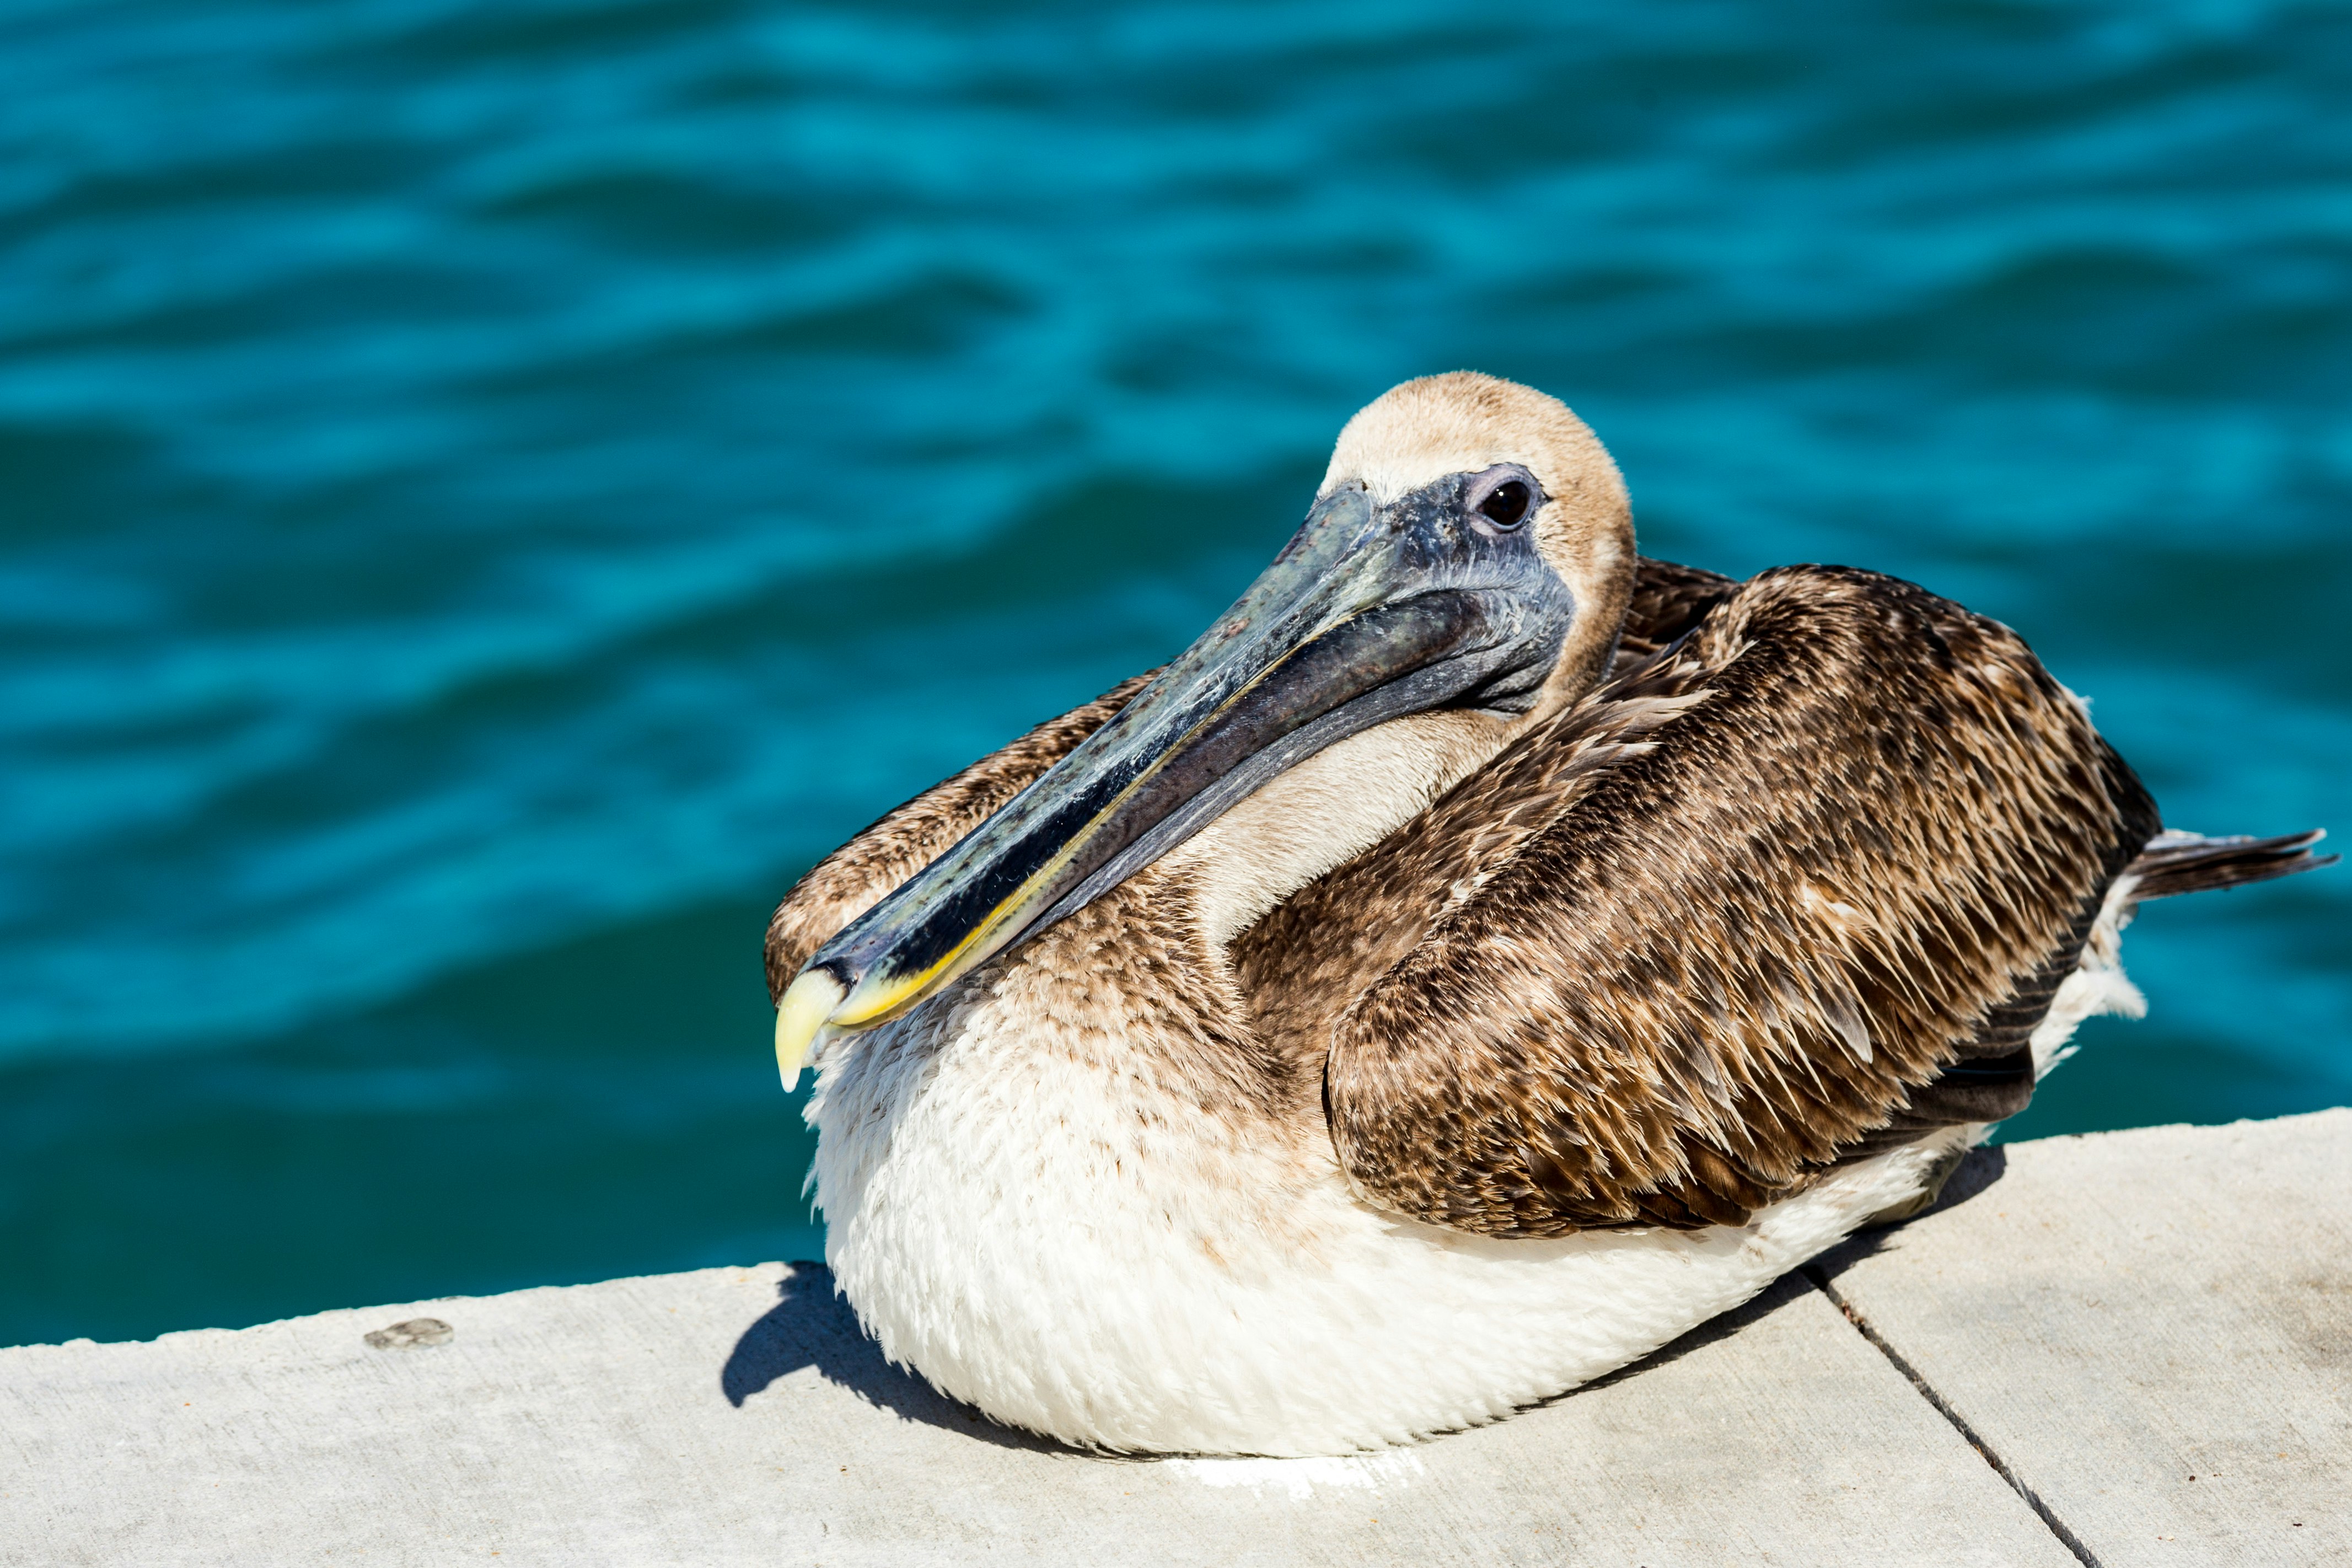 brown and white pelican sitting on concrete surface near body of water